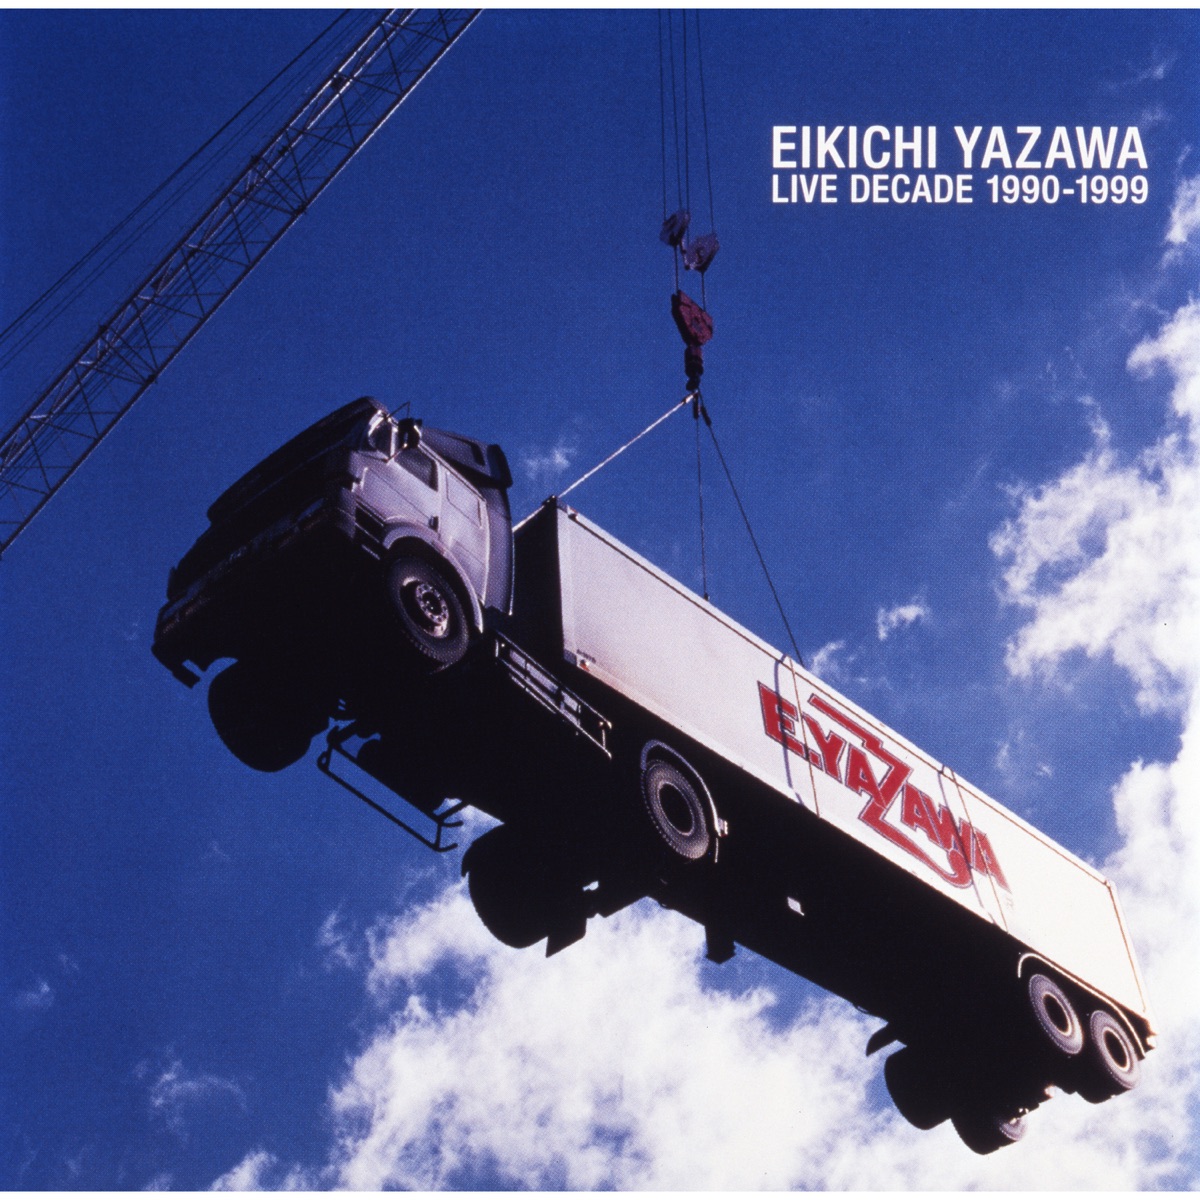 LIVE HISTORY 2000～2015 (50th Anniversary Remastered) - 矢沢永吉の